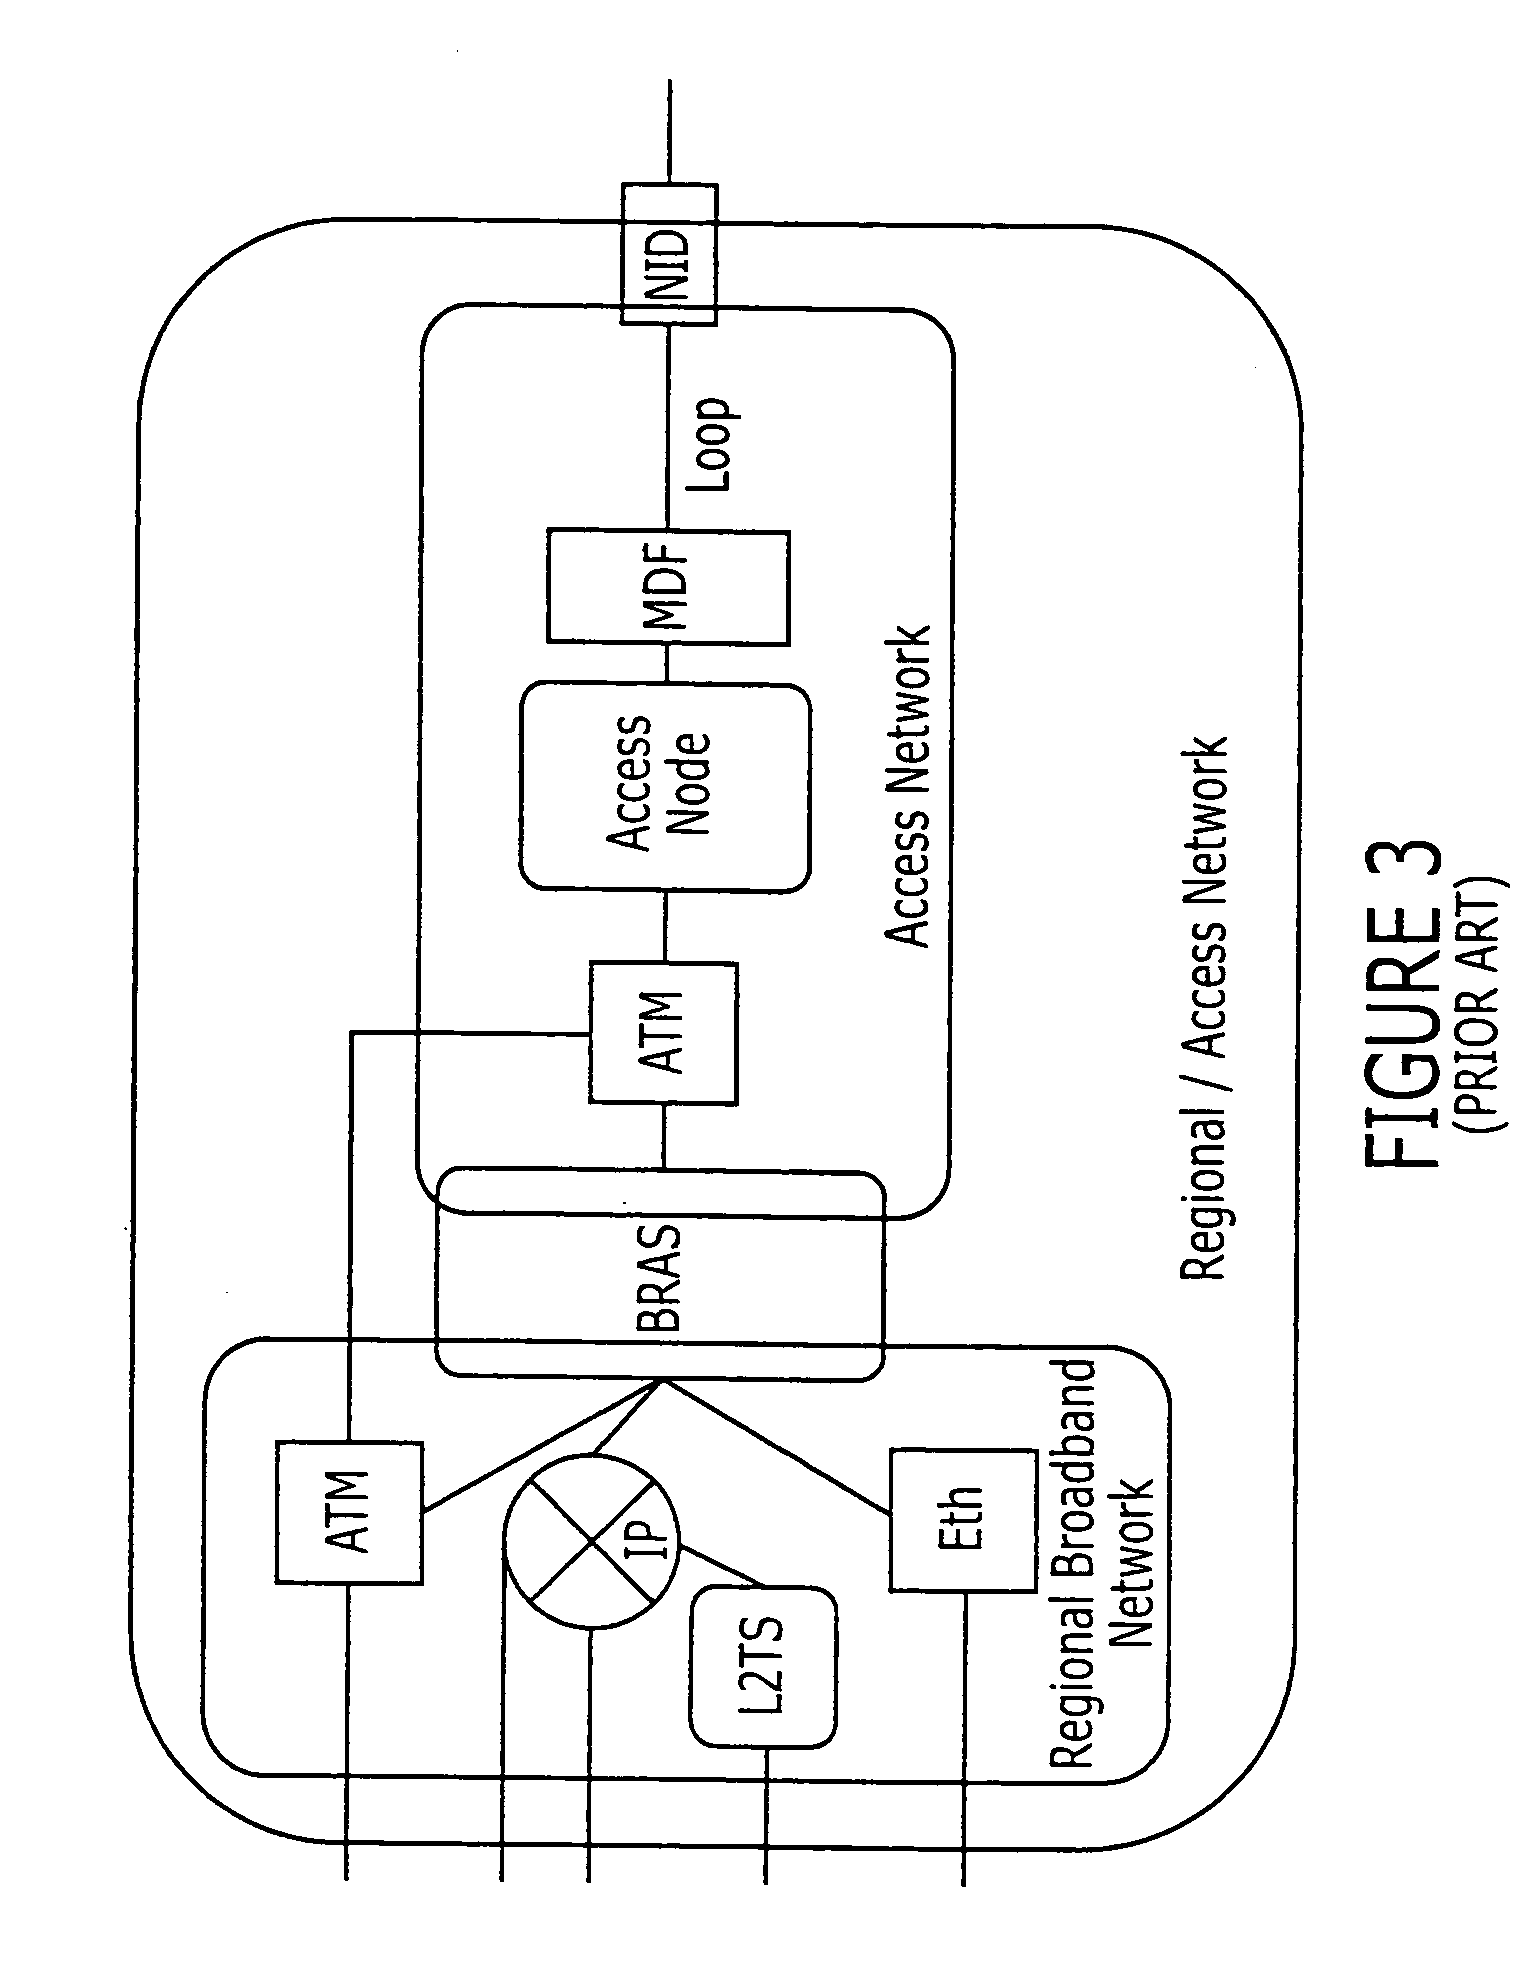 Methods, systems, and computer program products for modifying bandwidth and/or quality of service in a core network